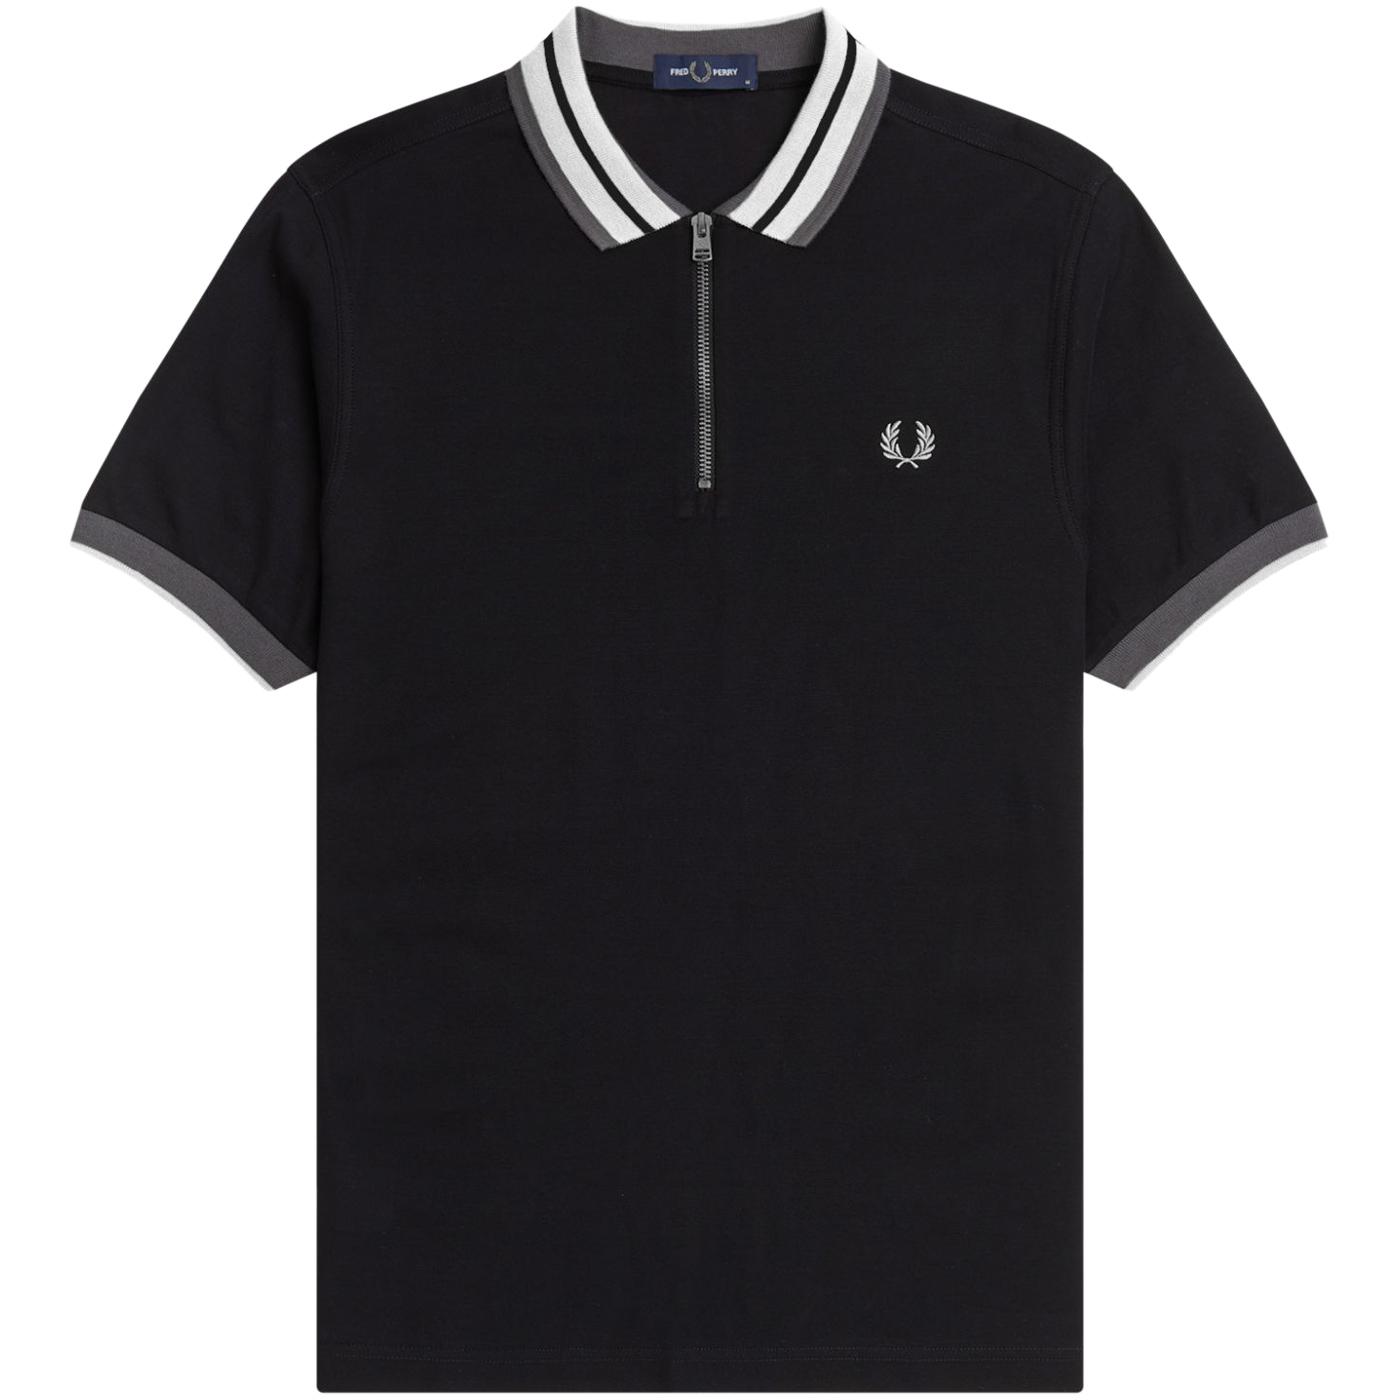 FRED PERRY Retro Mod Bold Tipped Zip Neck Polo Shirt Black